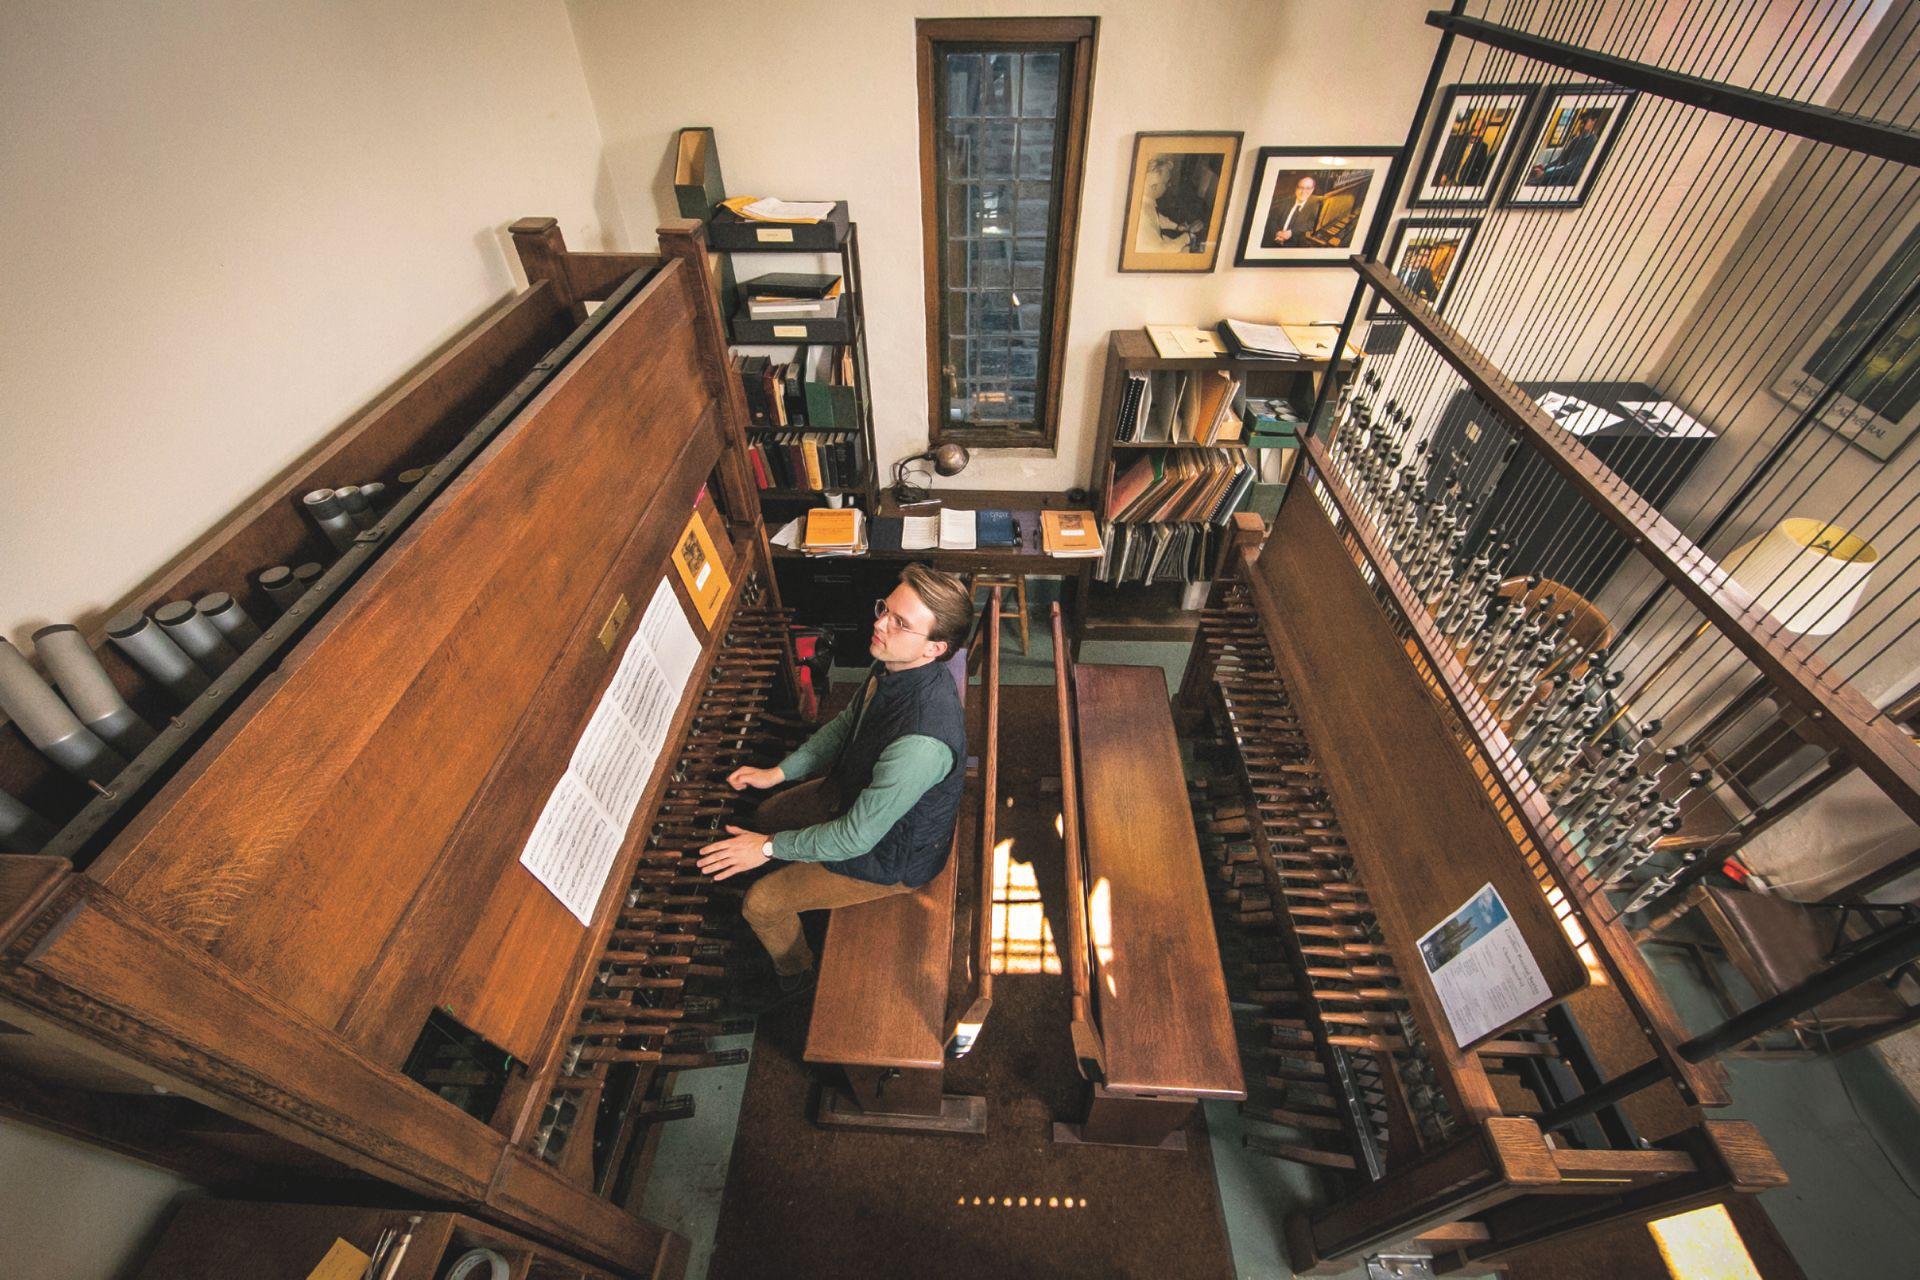 THUMBNAIL: Duke Divinity School graduate student Chase Benefiel rehearses a recital on the practice side of the carillon inside the tower of Duke Chapel.